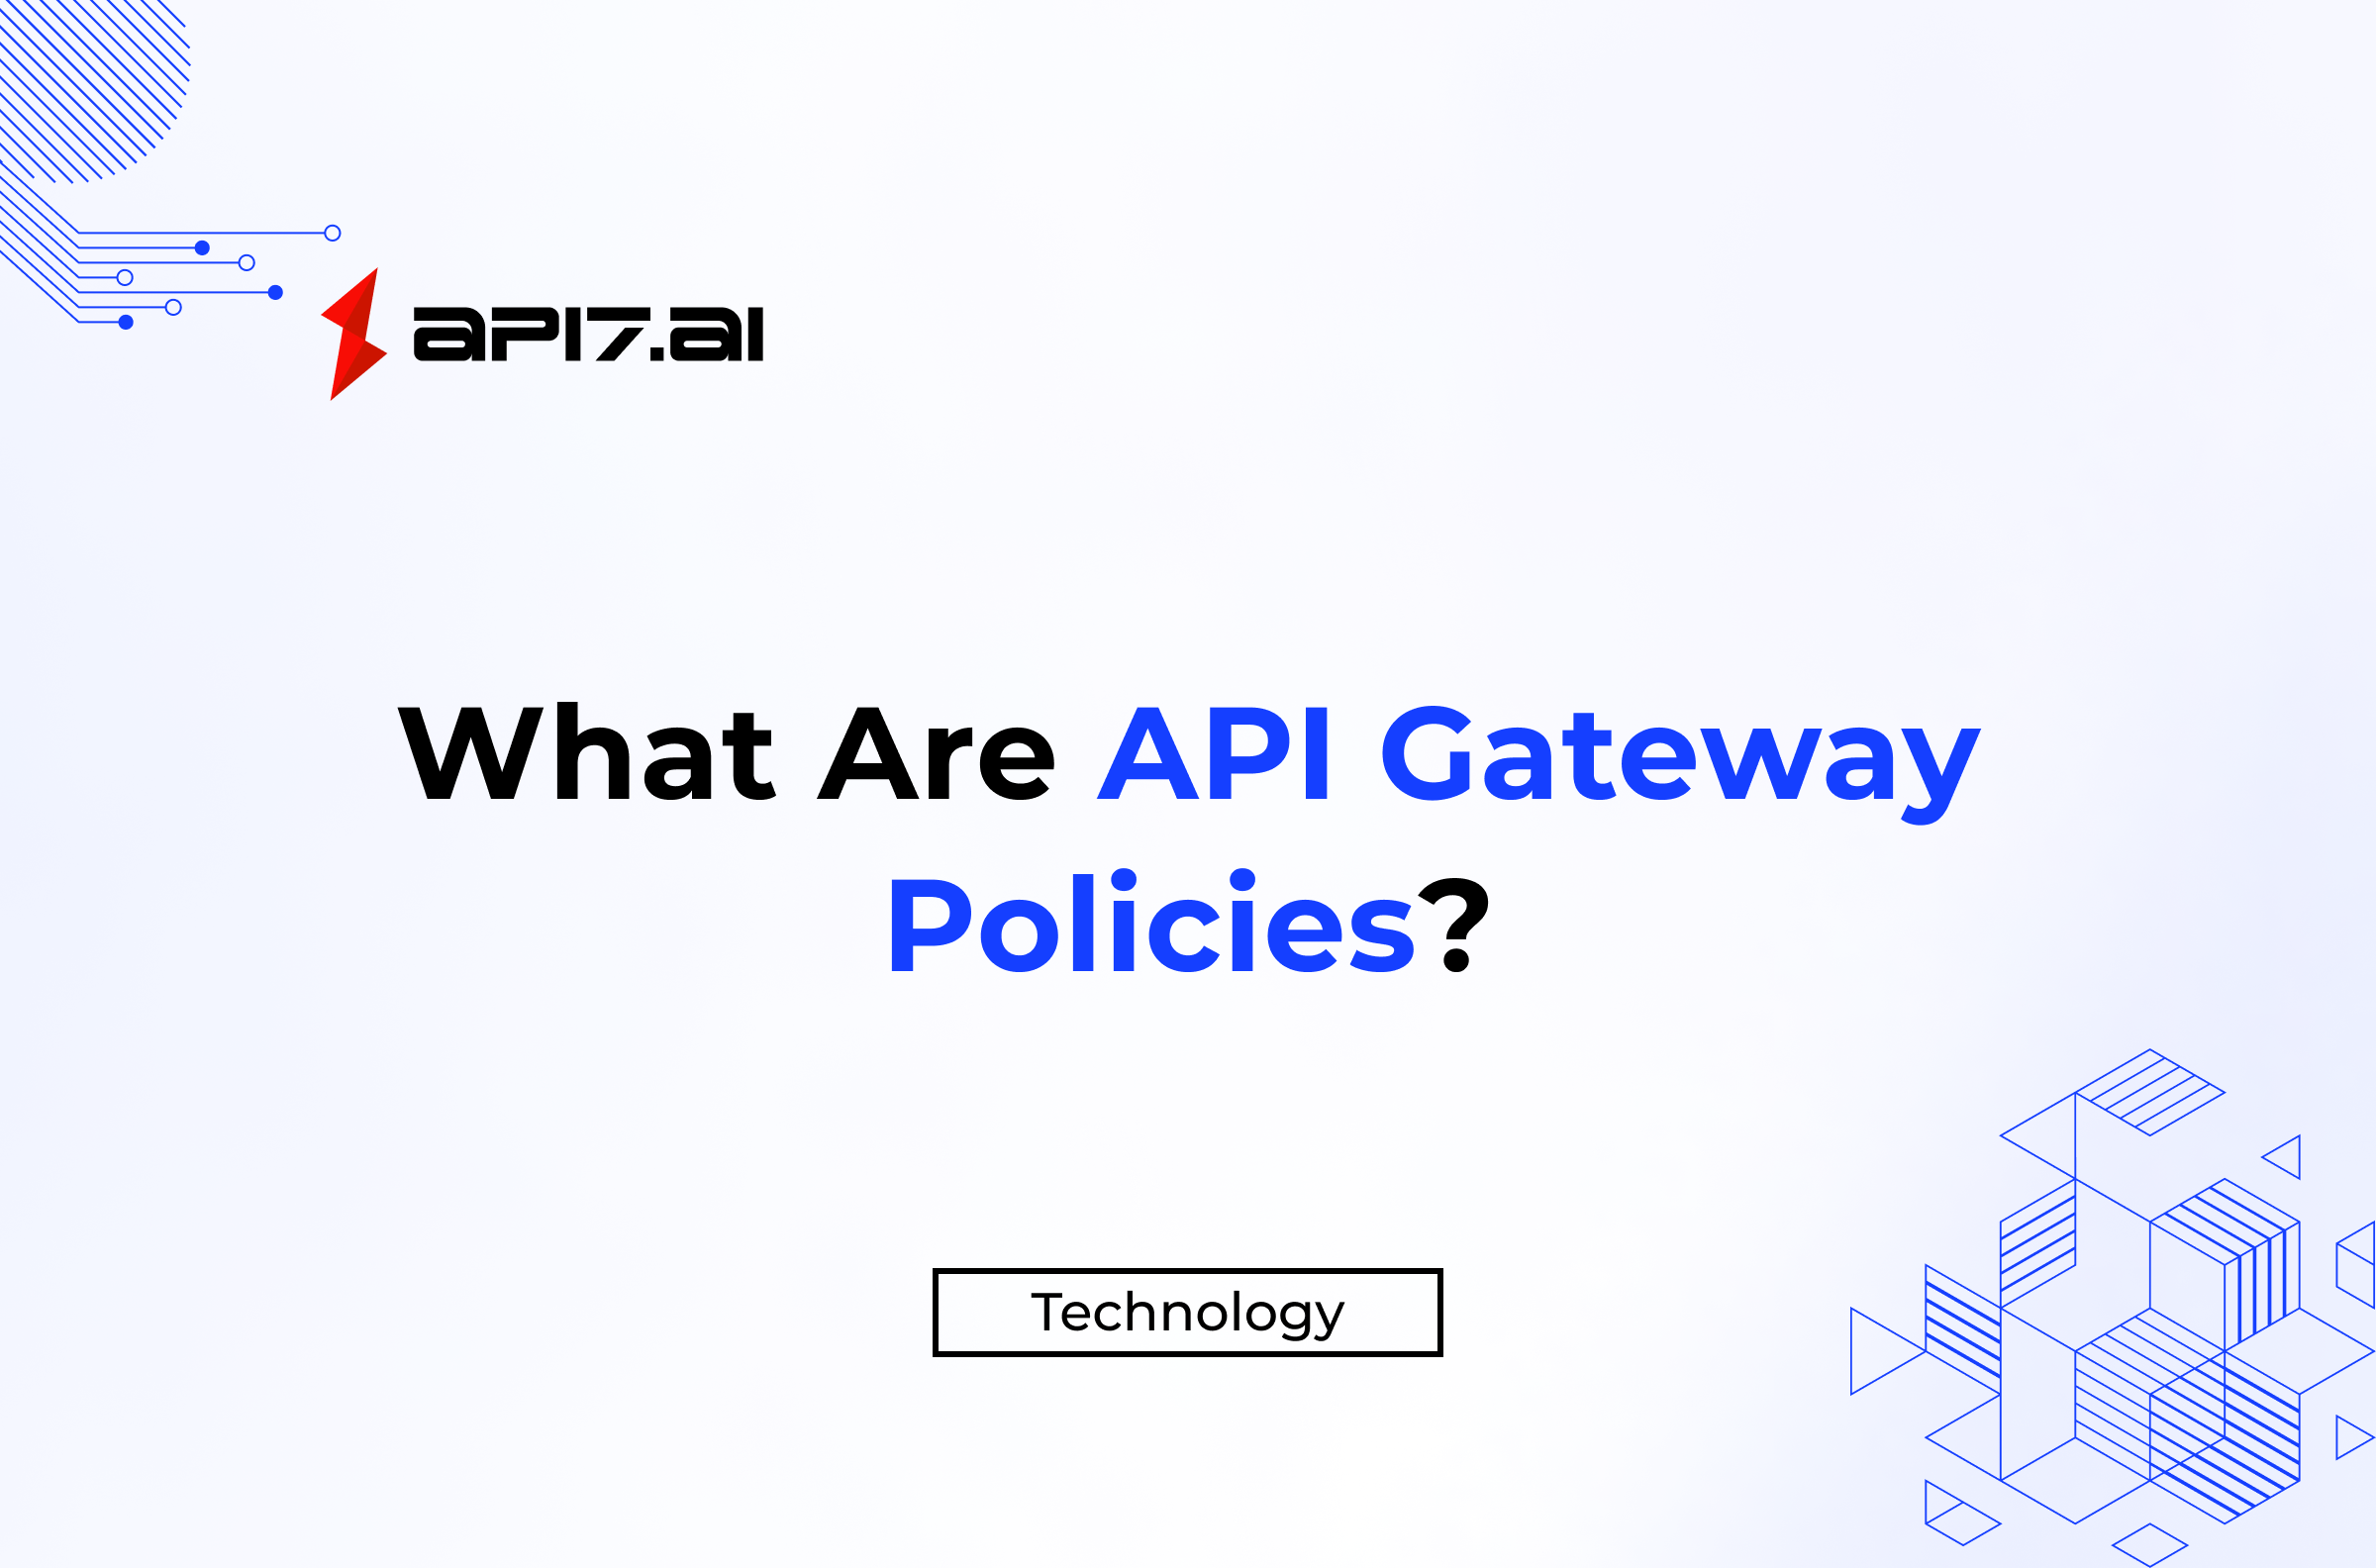 What Are API Gateway Policies?